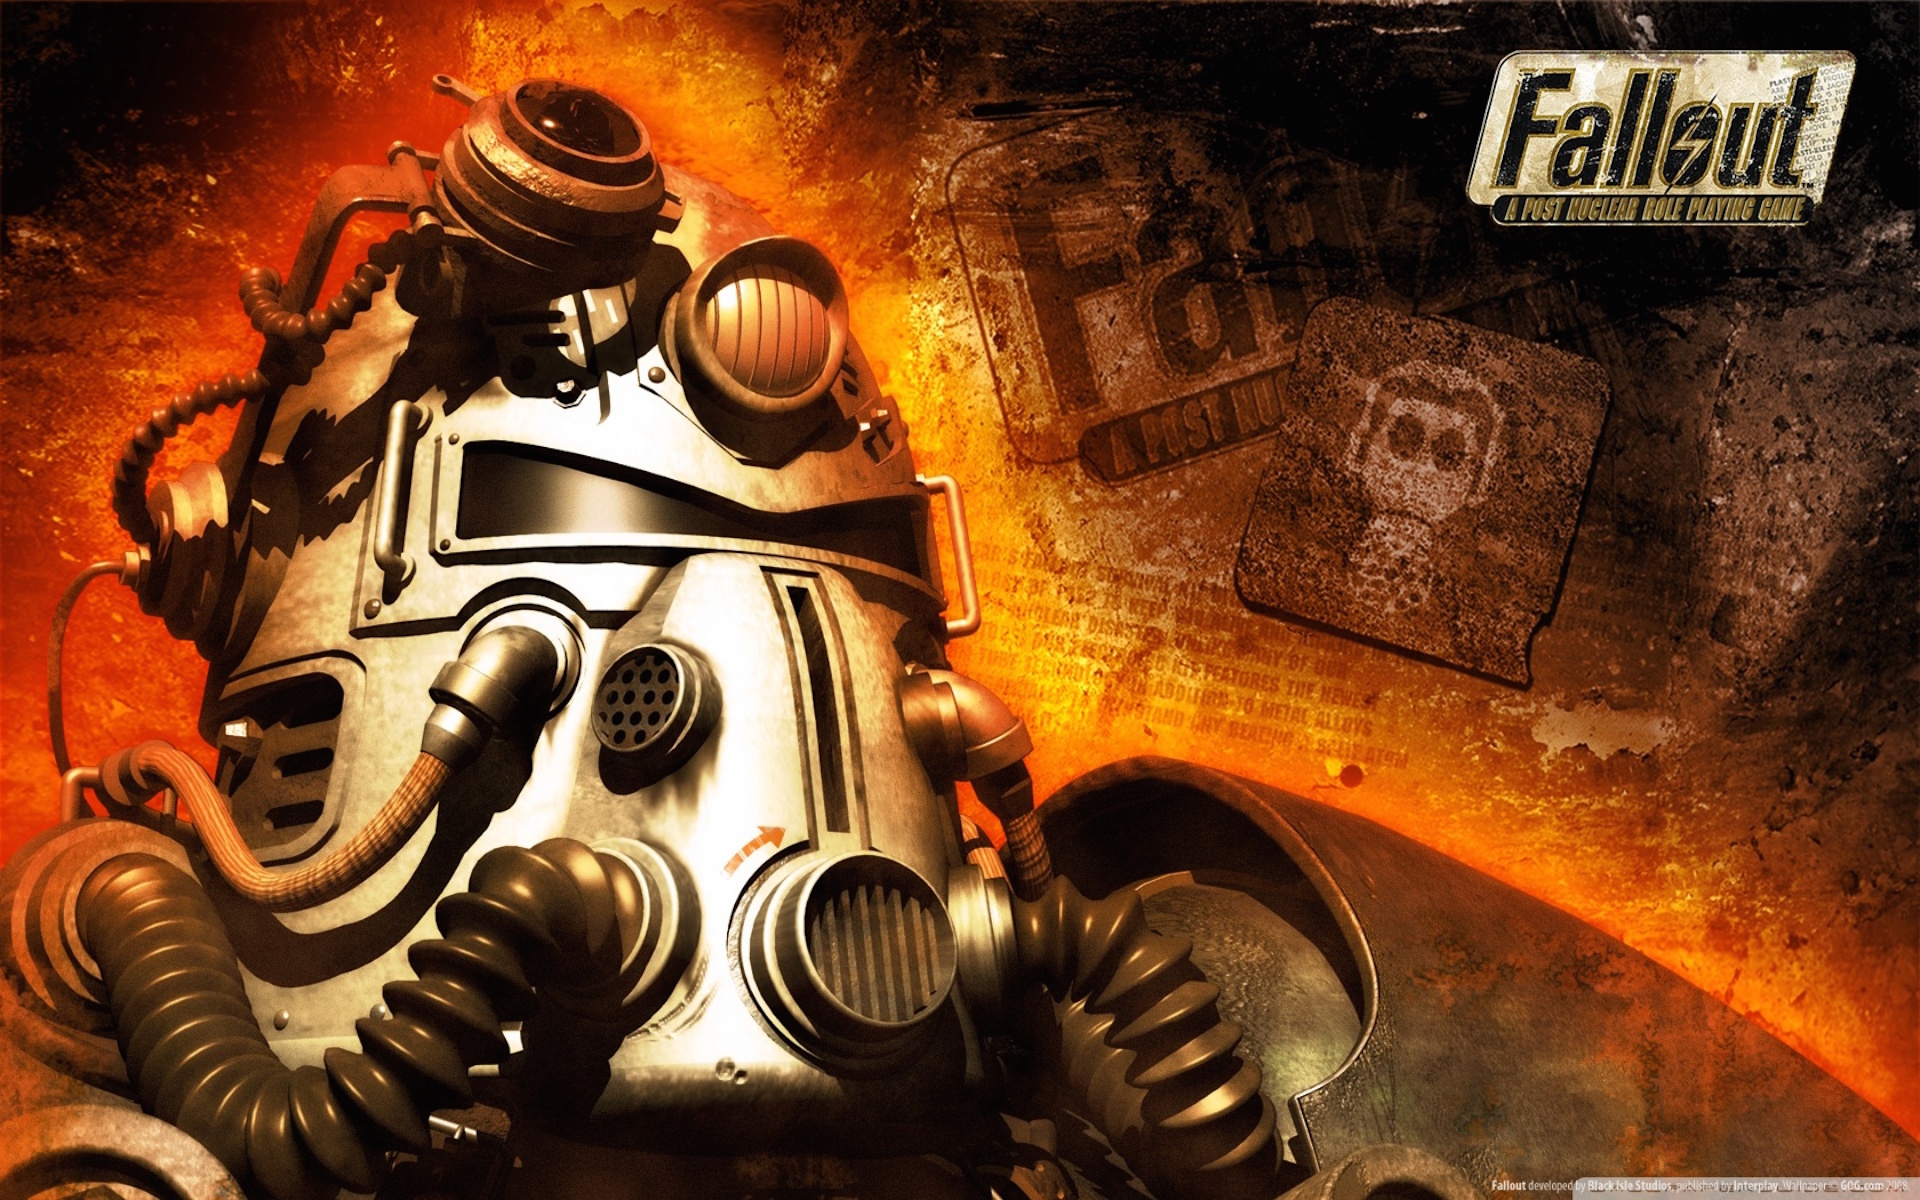 Fallout: the top 5 of the best games for those who loved the series